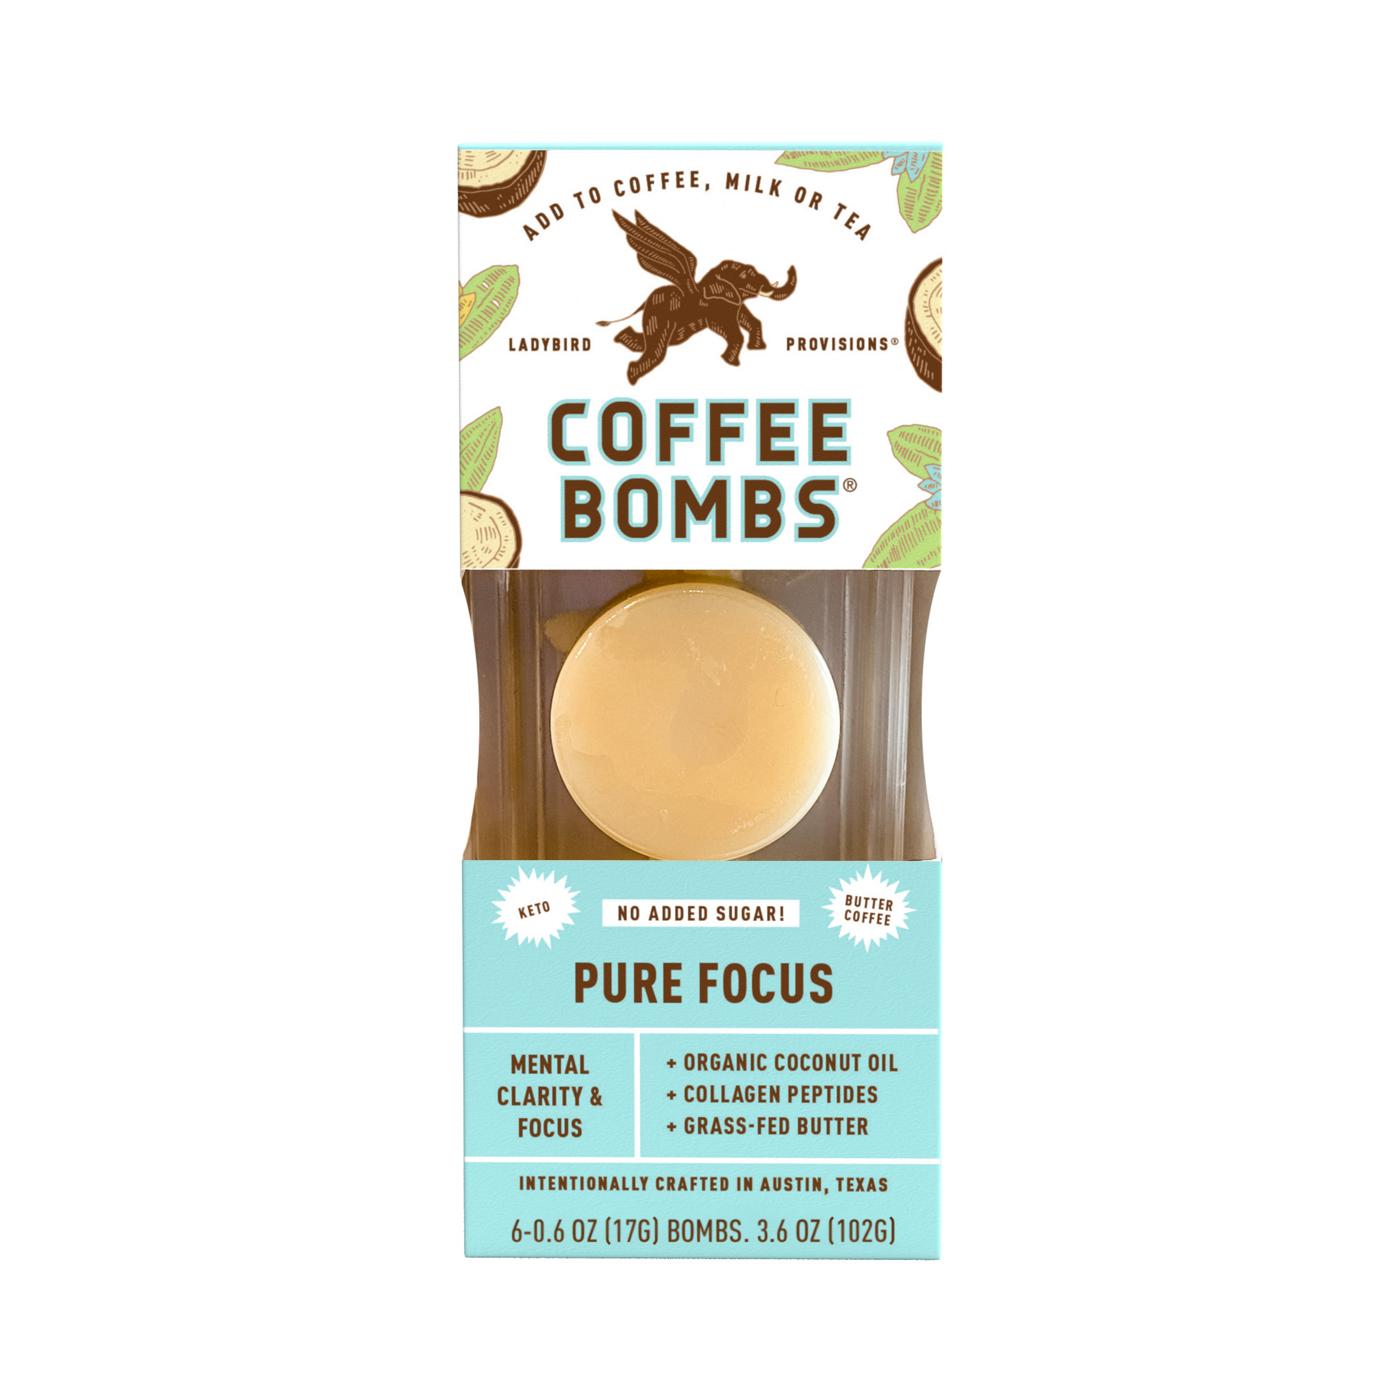 Ladybird Provisions Pure Focus Coffee Bombs; image 1 of 2